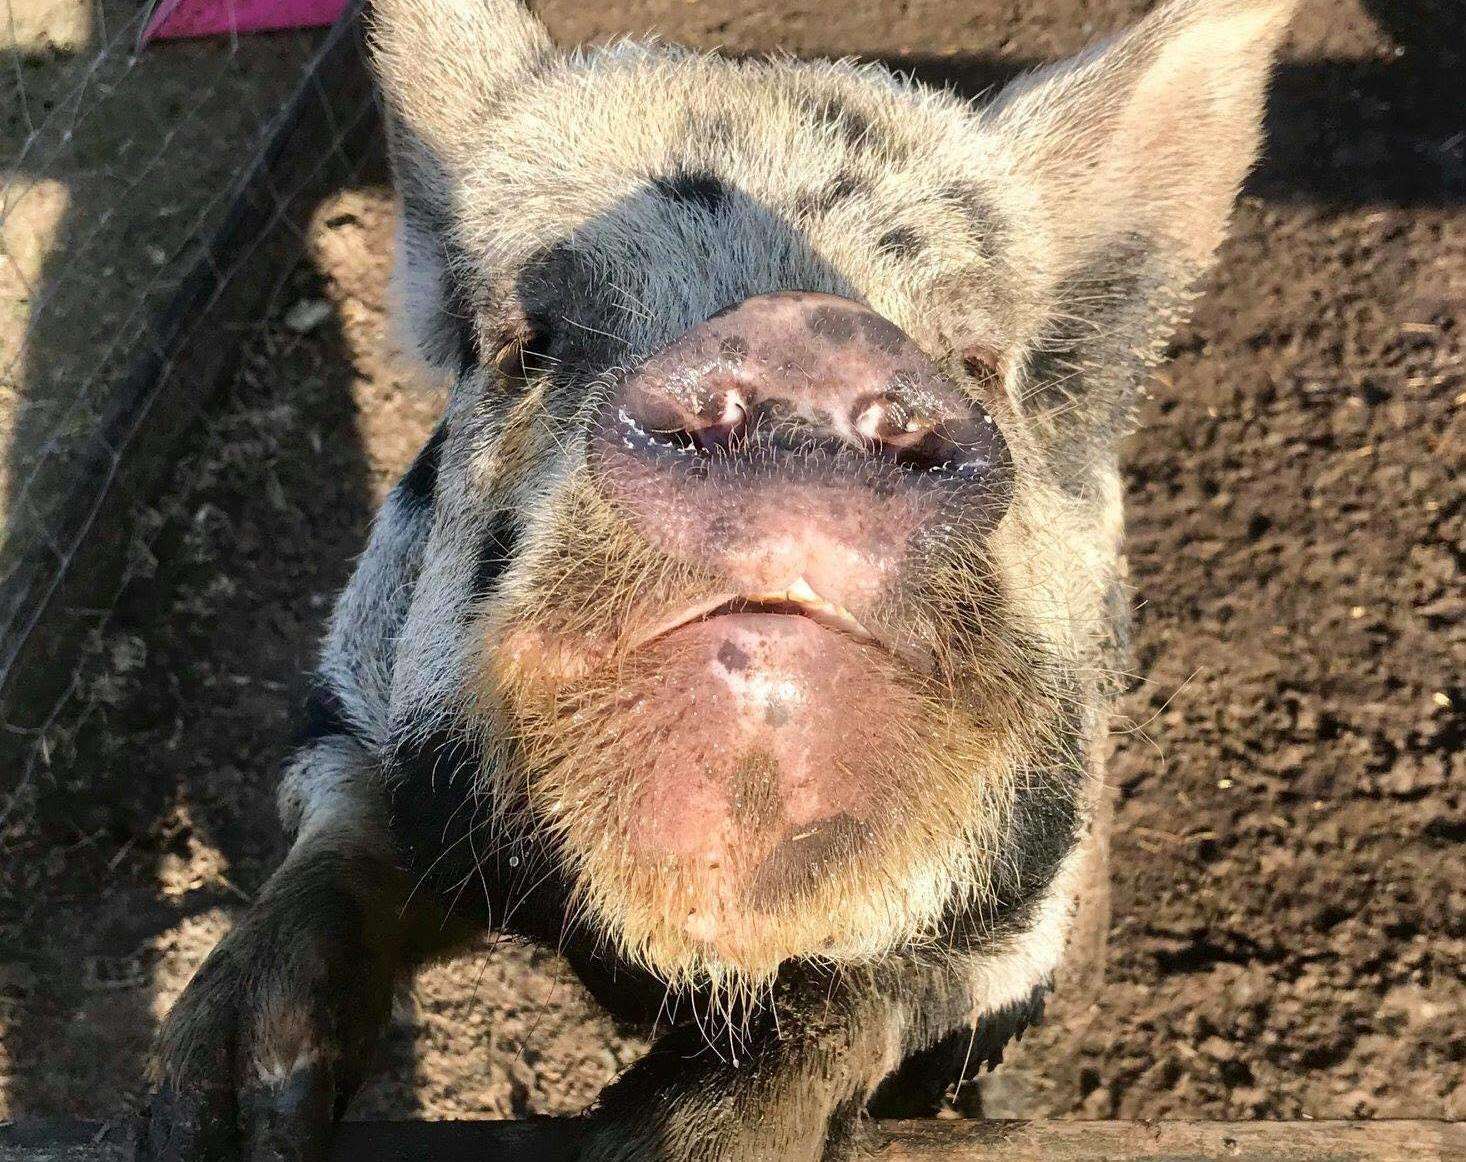 A campaign has been launched to save the life of Angel the pig